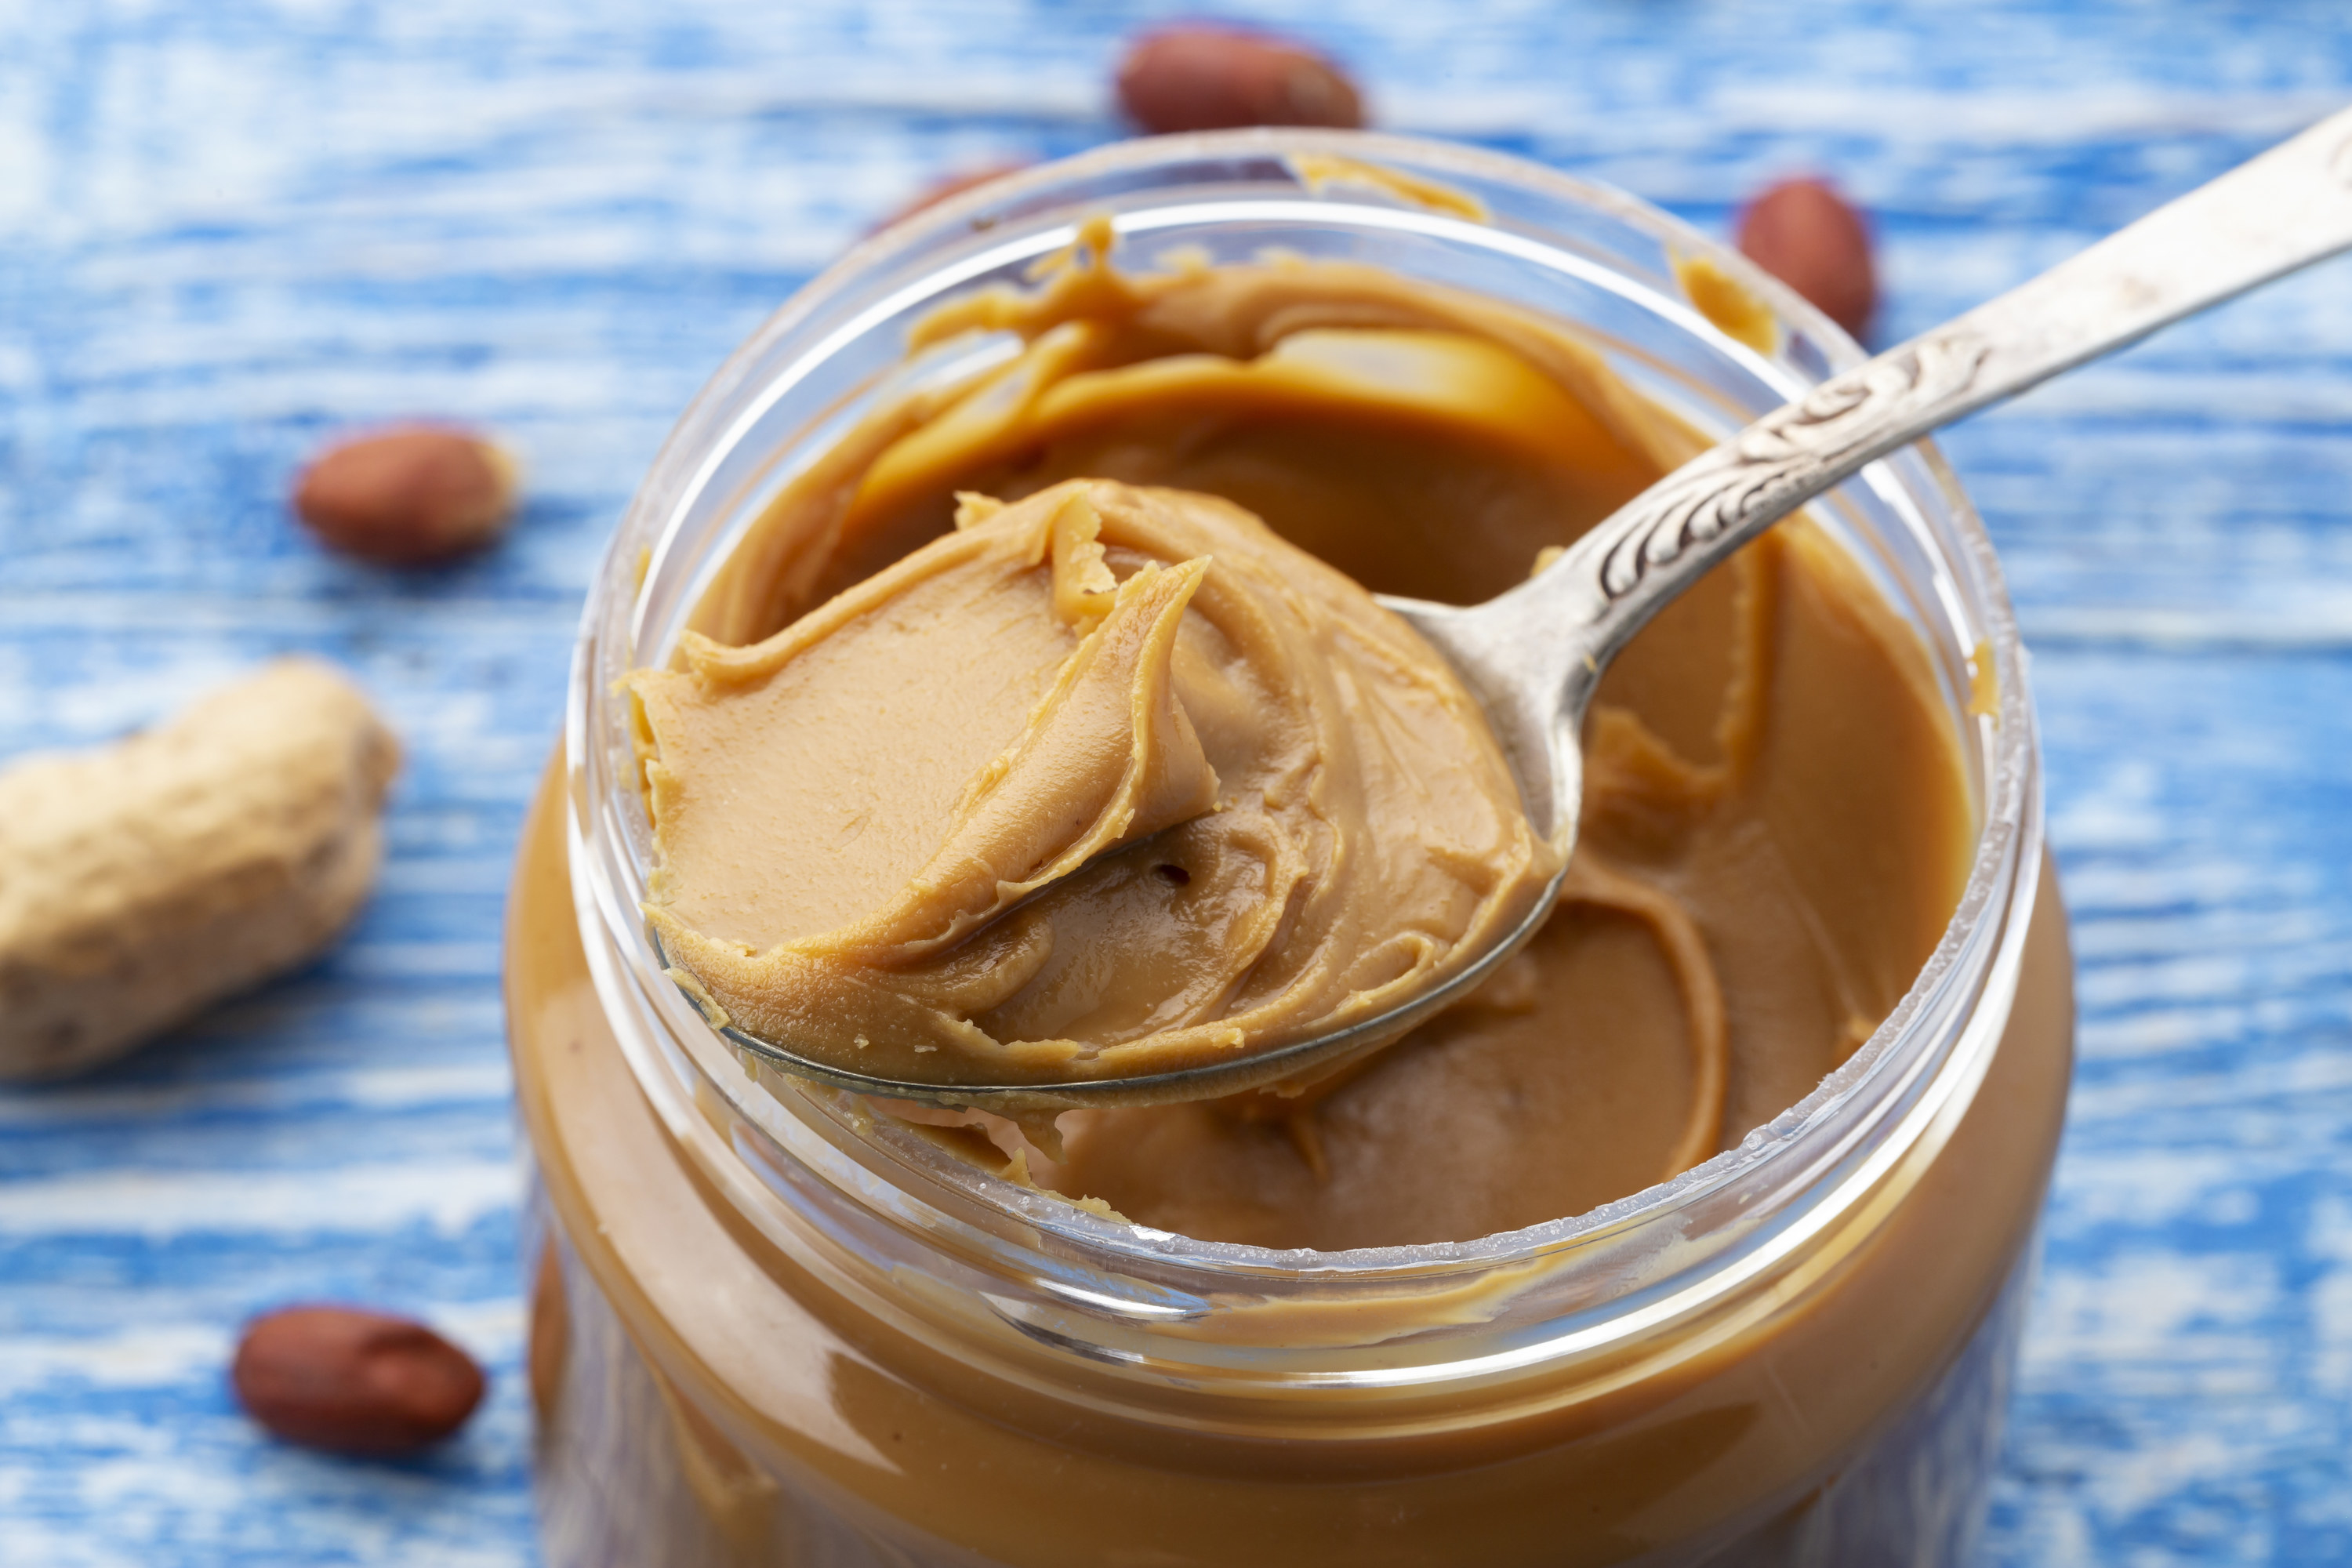 peanut butter being spooned out of a jar